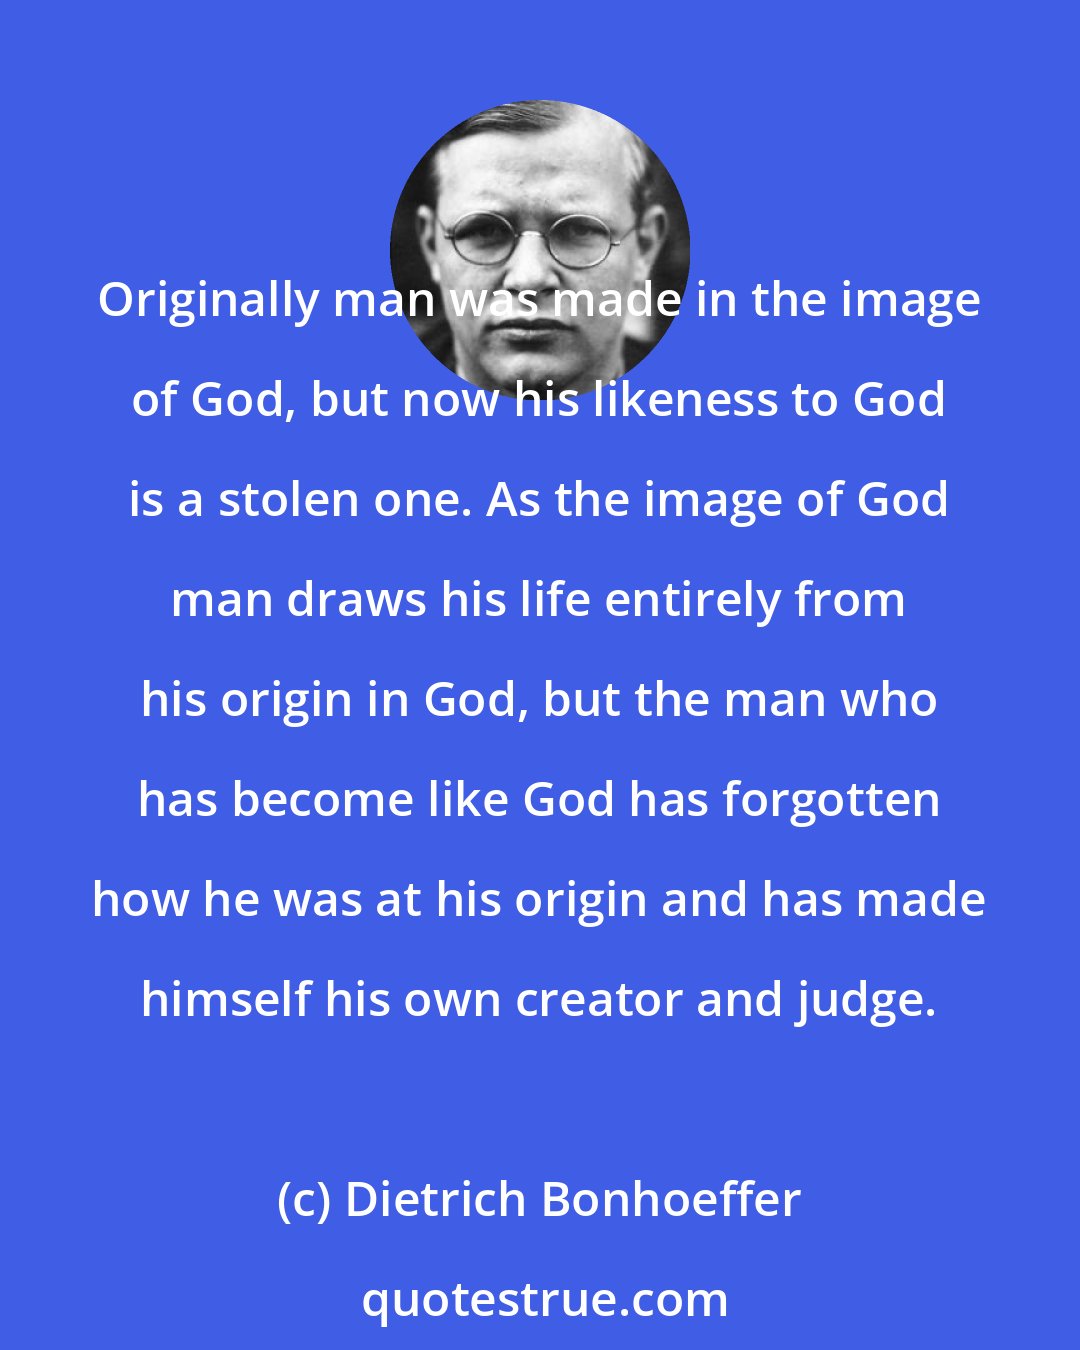 Dietrich Bonhoeffer: Originally man was made in the image of God, but now his likeness to God is a stolen one. As the image of God man draws his life entirely from his origin in God, but the man who has become like God has forgotten how he was at his origin and has made himself his own creator and judge.